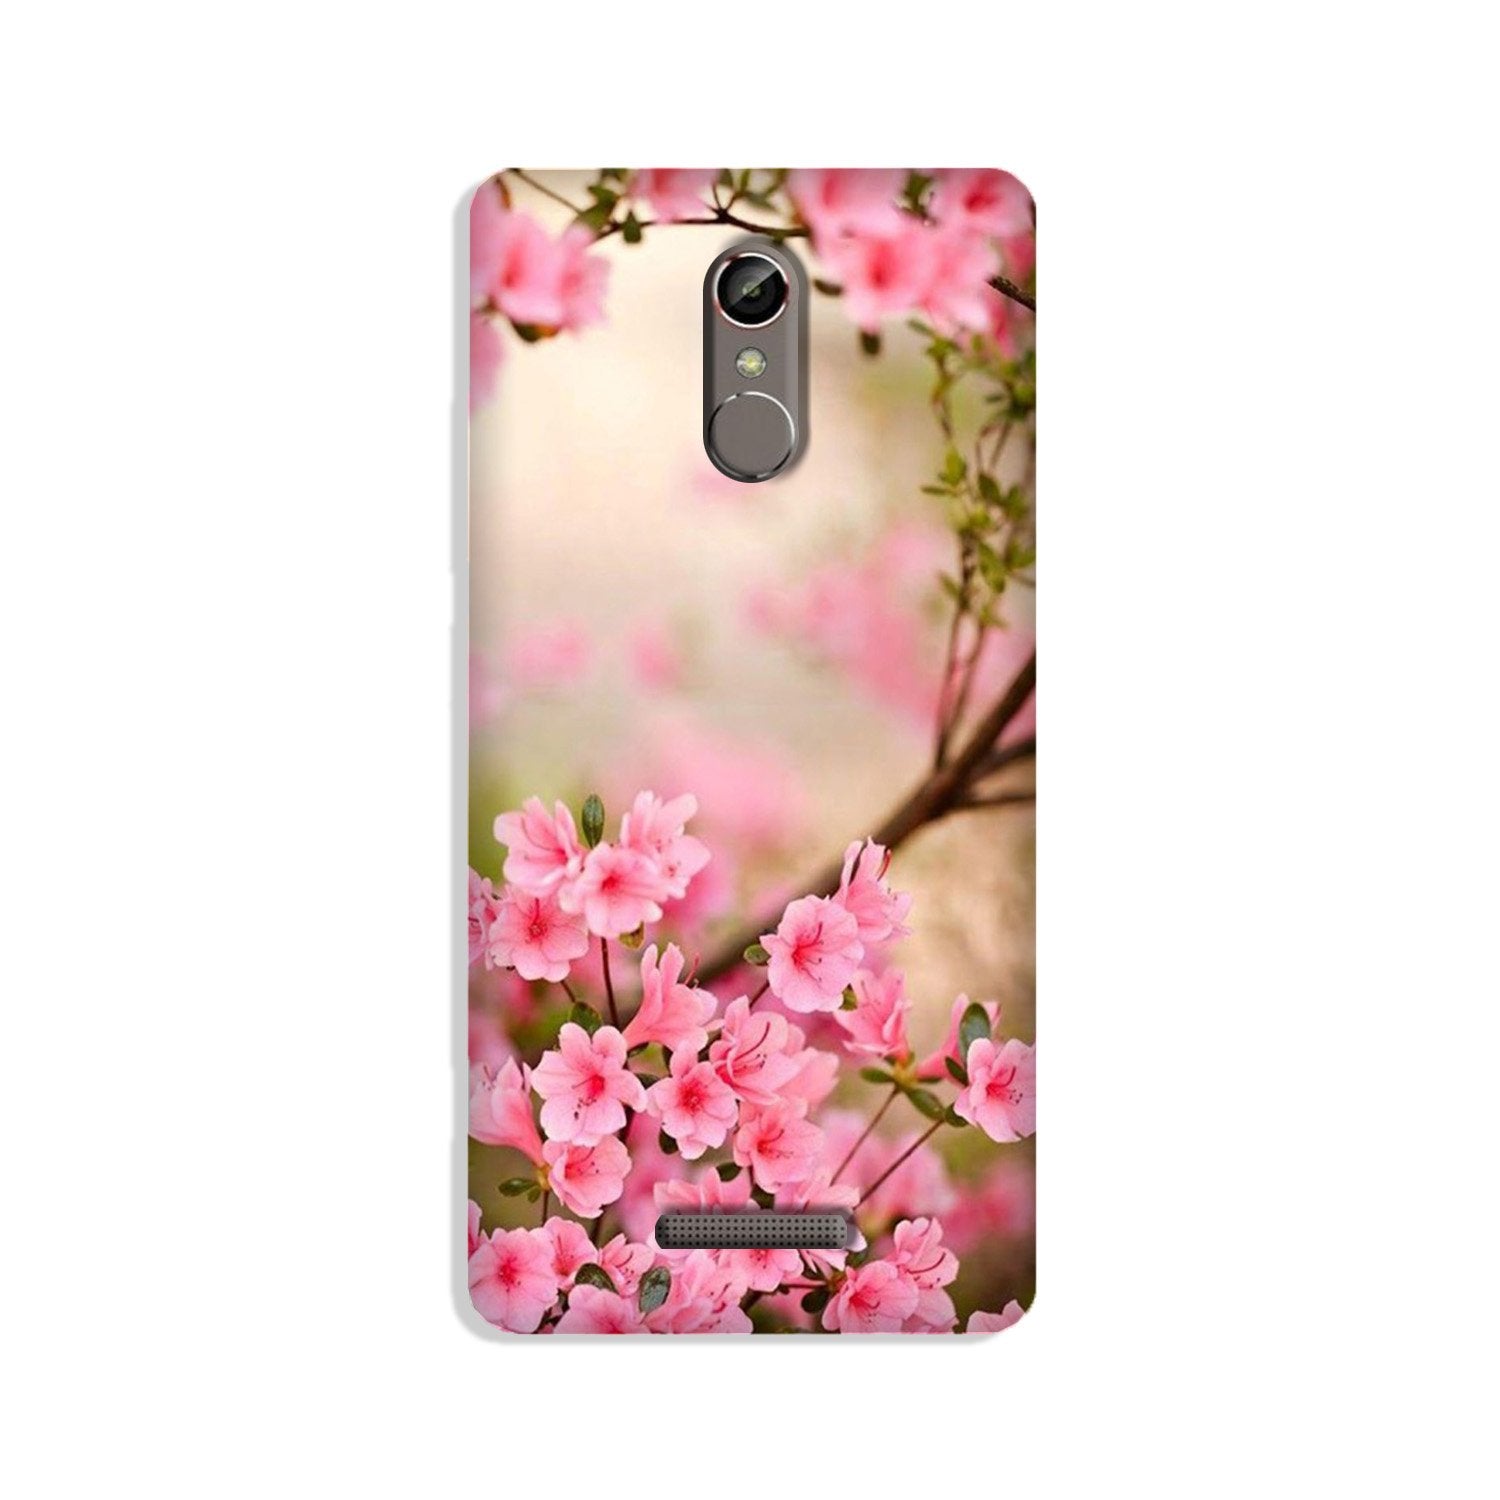 Pink flowers Case for Redmi Note 3